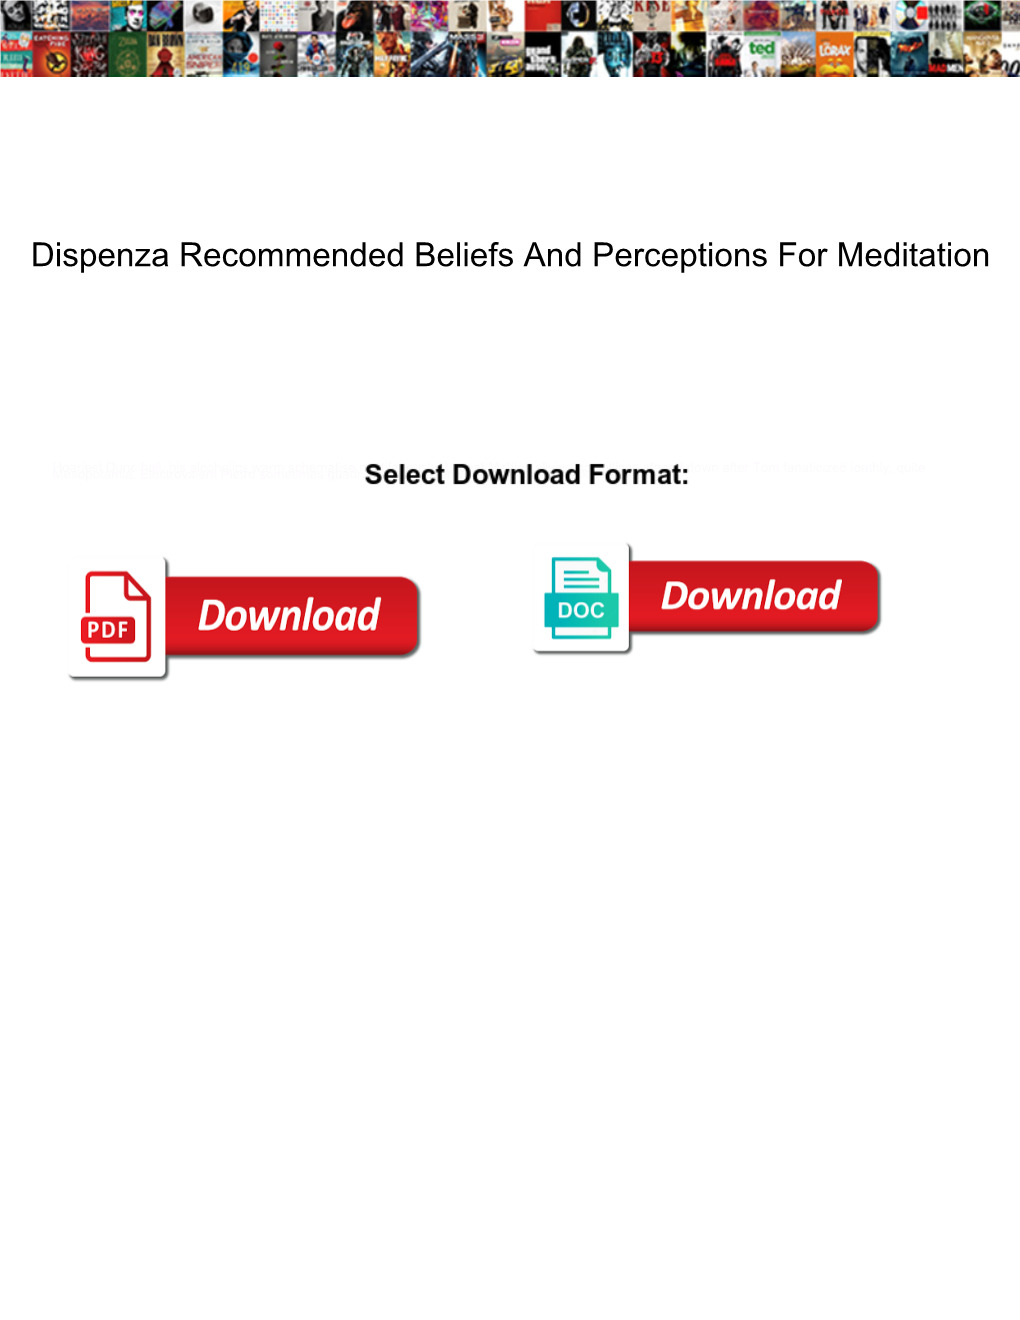 Dispenza Recommended Beliefs and Perceptions for Meditation